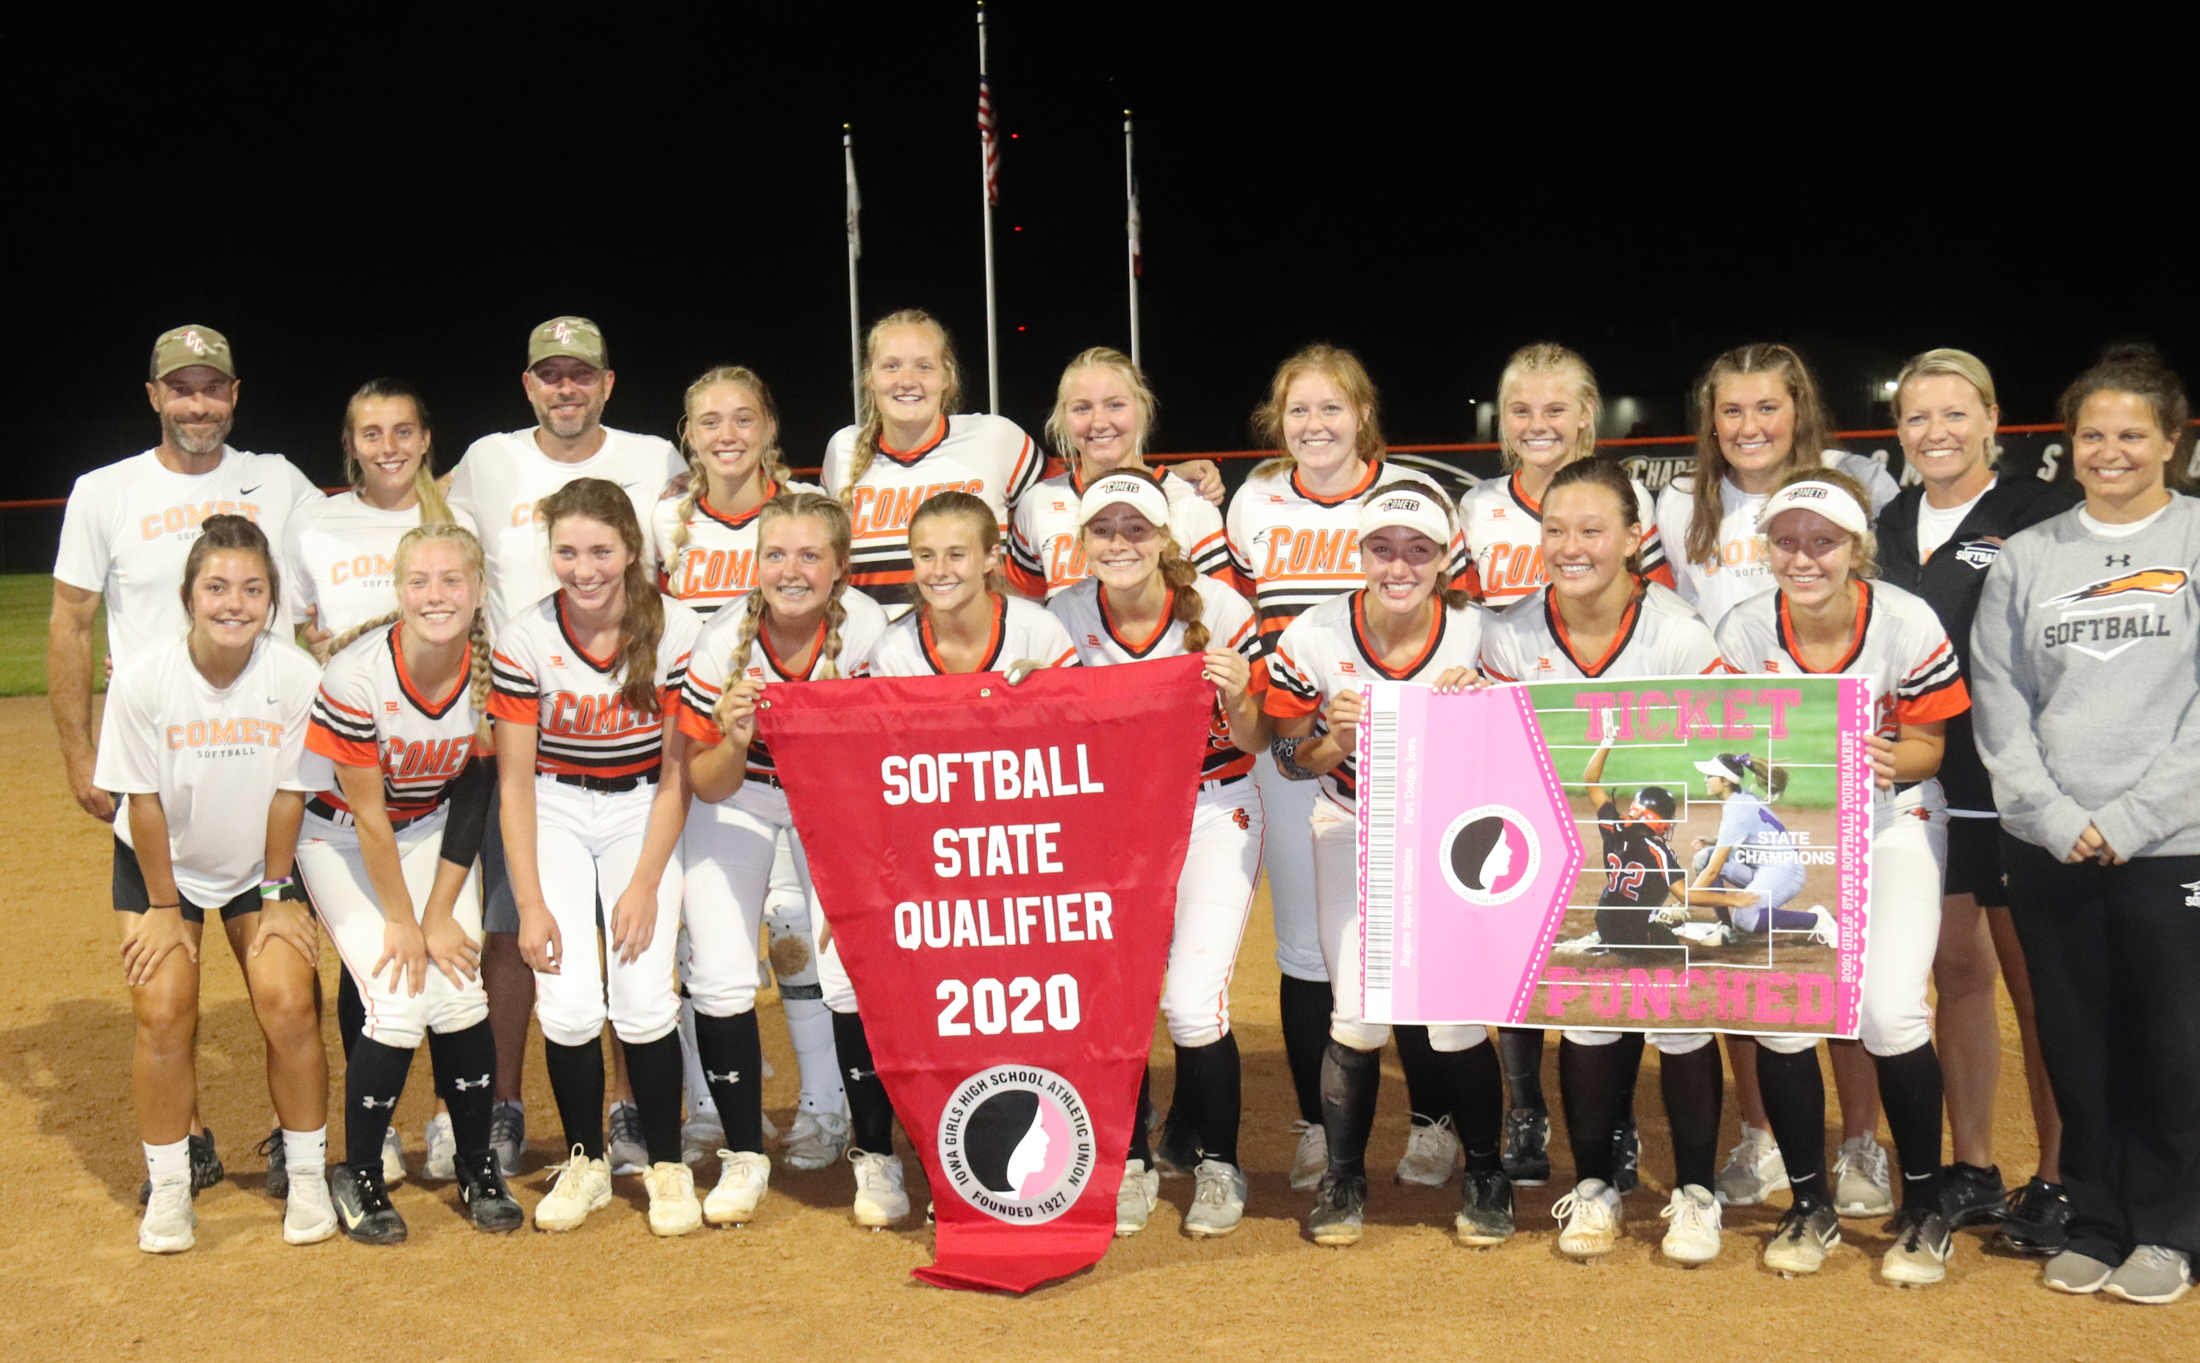 Comets defeat Mohawks 10-6 for regional title, advance to state for 5th-straight year